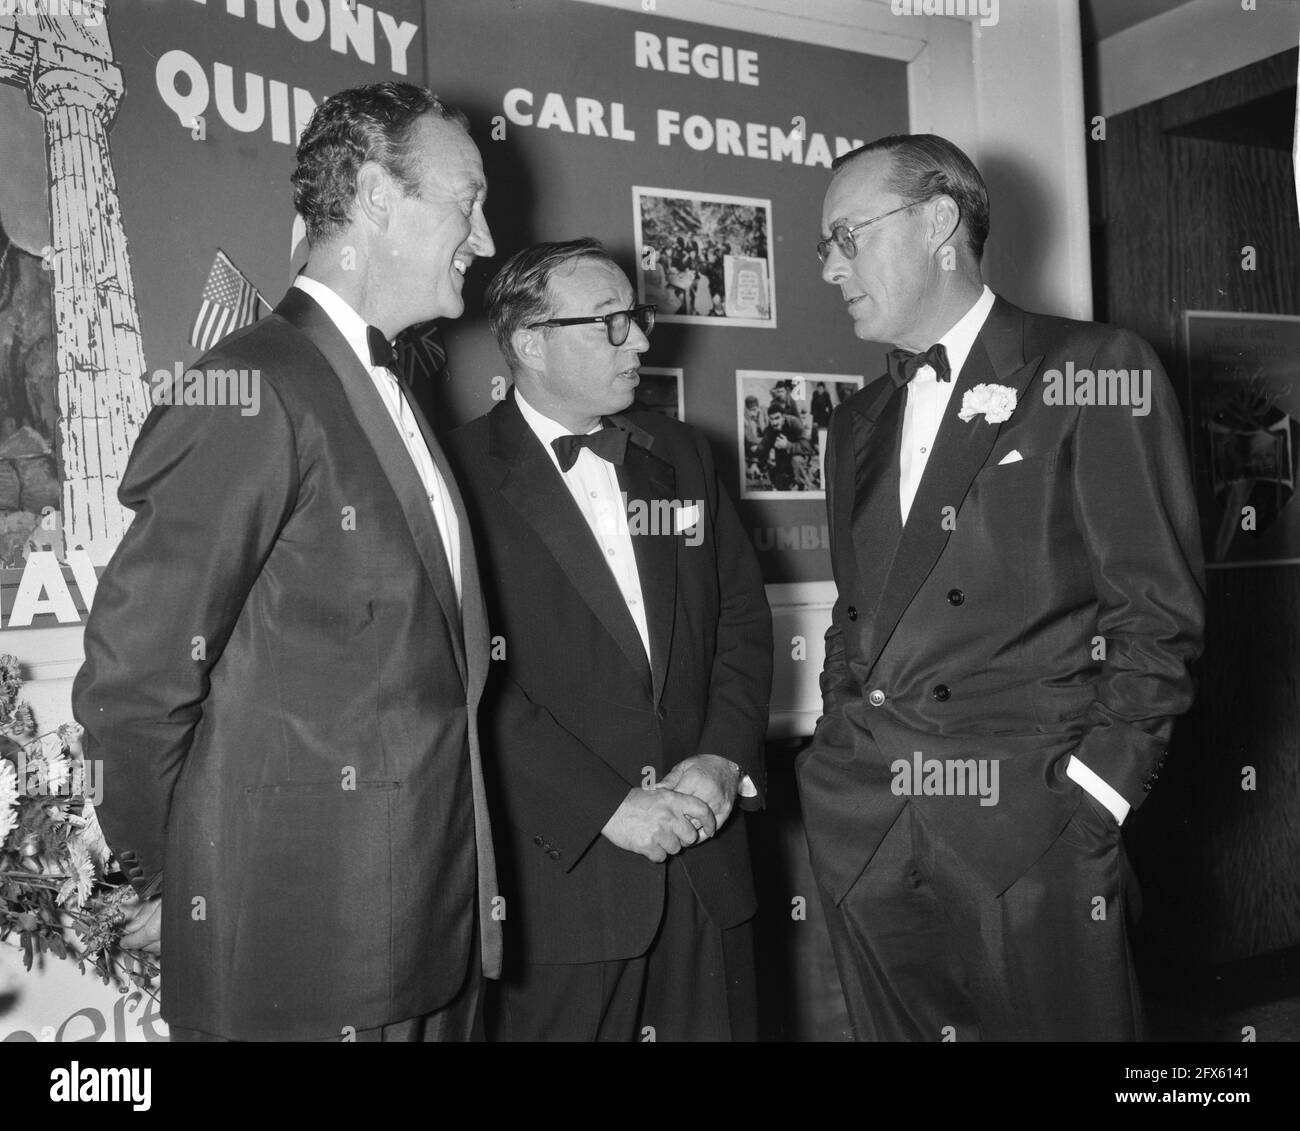 Prince Bernhard attends gala screening of the film The Guns of Navarone. David Niven (left), Carl Foreman (screenwriter) and Prince Bernhard, October 6, 1961, actors, cinemas, movies, movie stars, royal family, princes, The Netherlands, 20th century press agency photo, news to remember, documentary, historic photography 1945-1990, visual stories, human history of the Twentieth Century, capturing moments in time Stock Photo